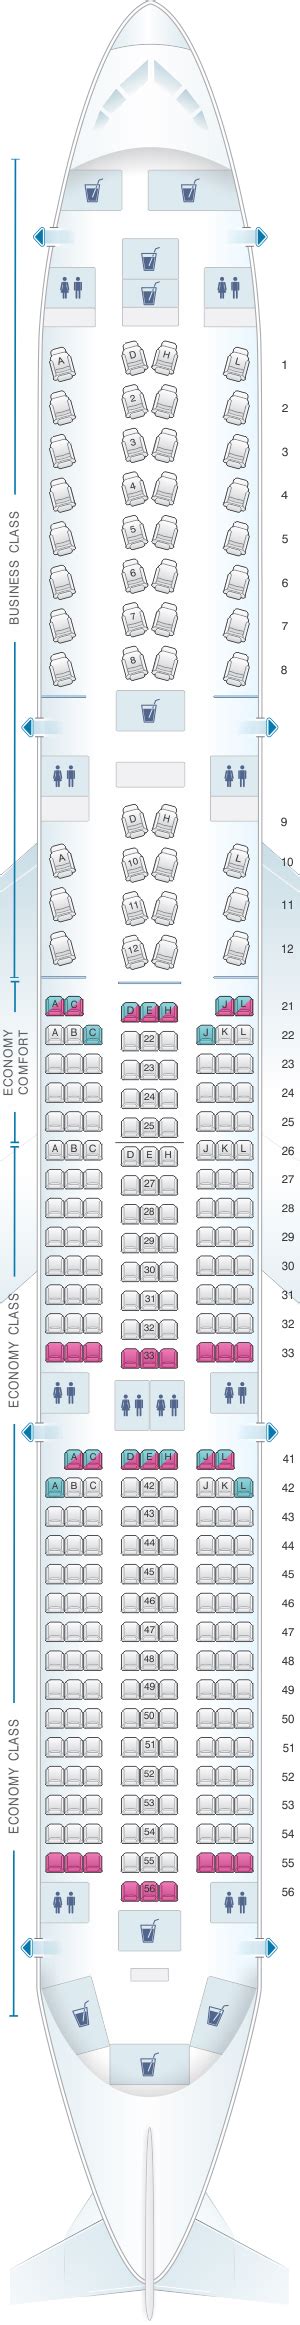 29 A350 900 Seat Map Online Map Around The World